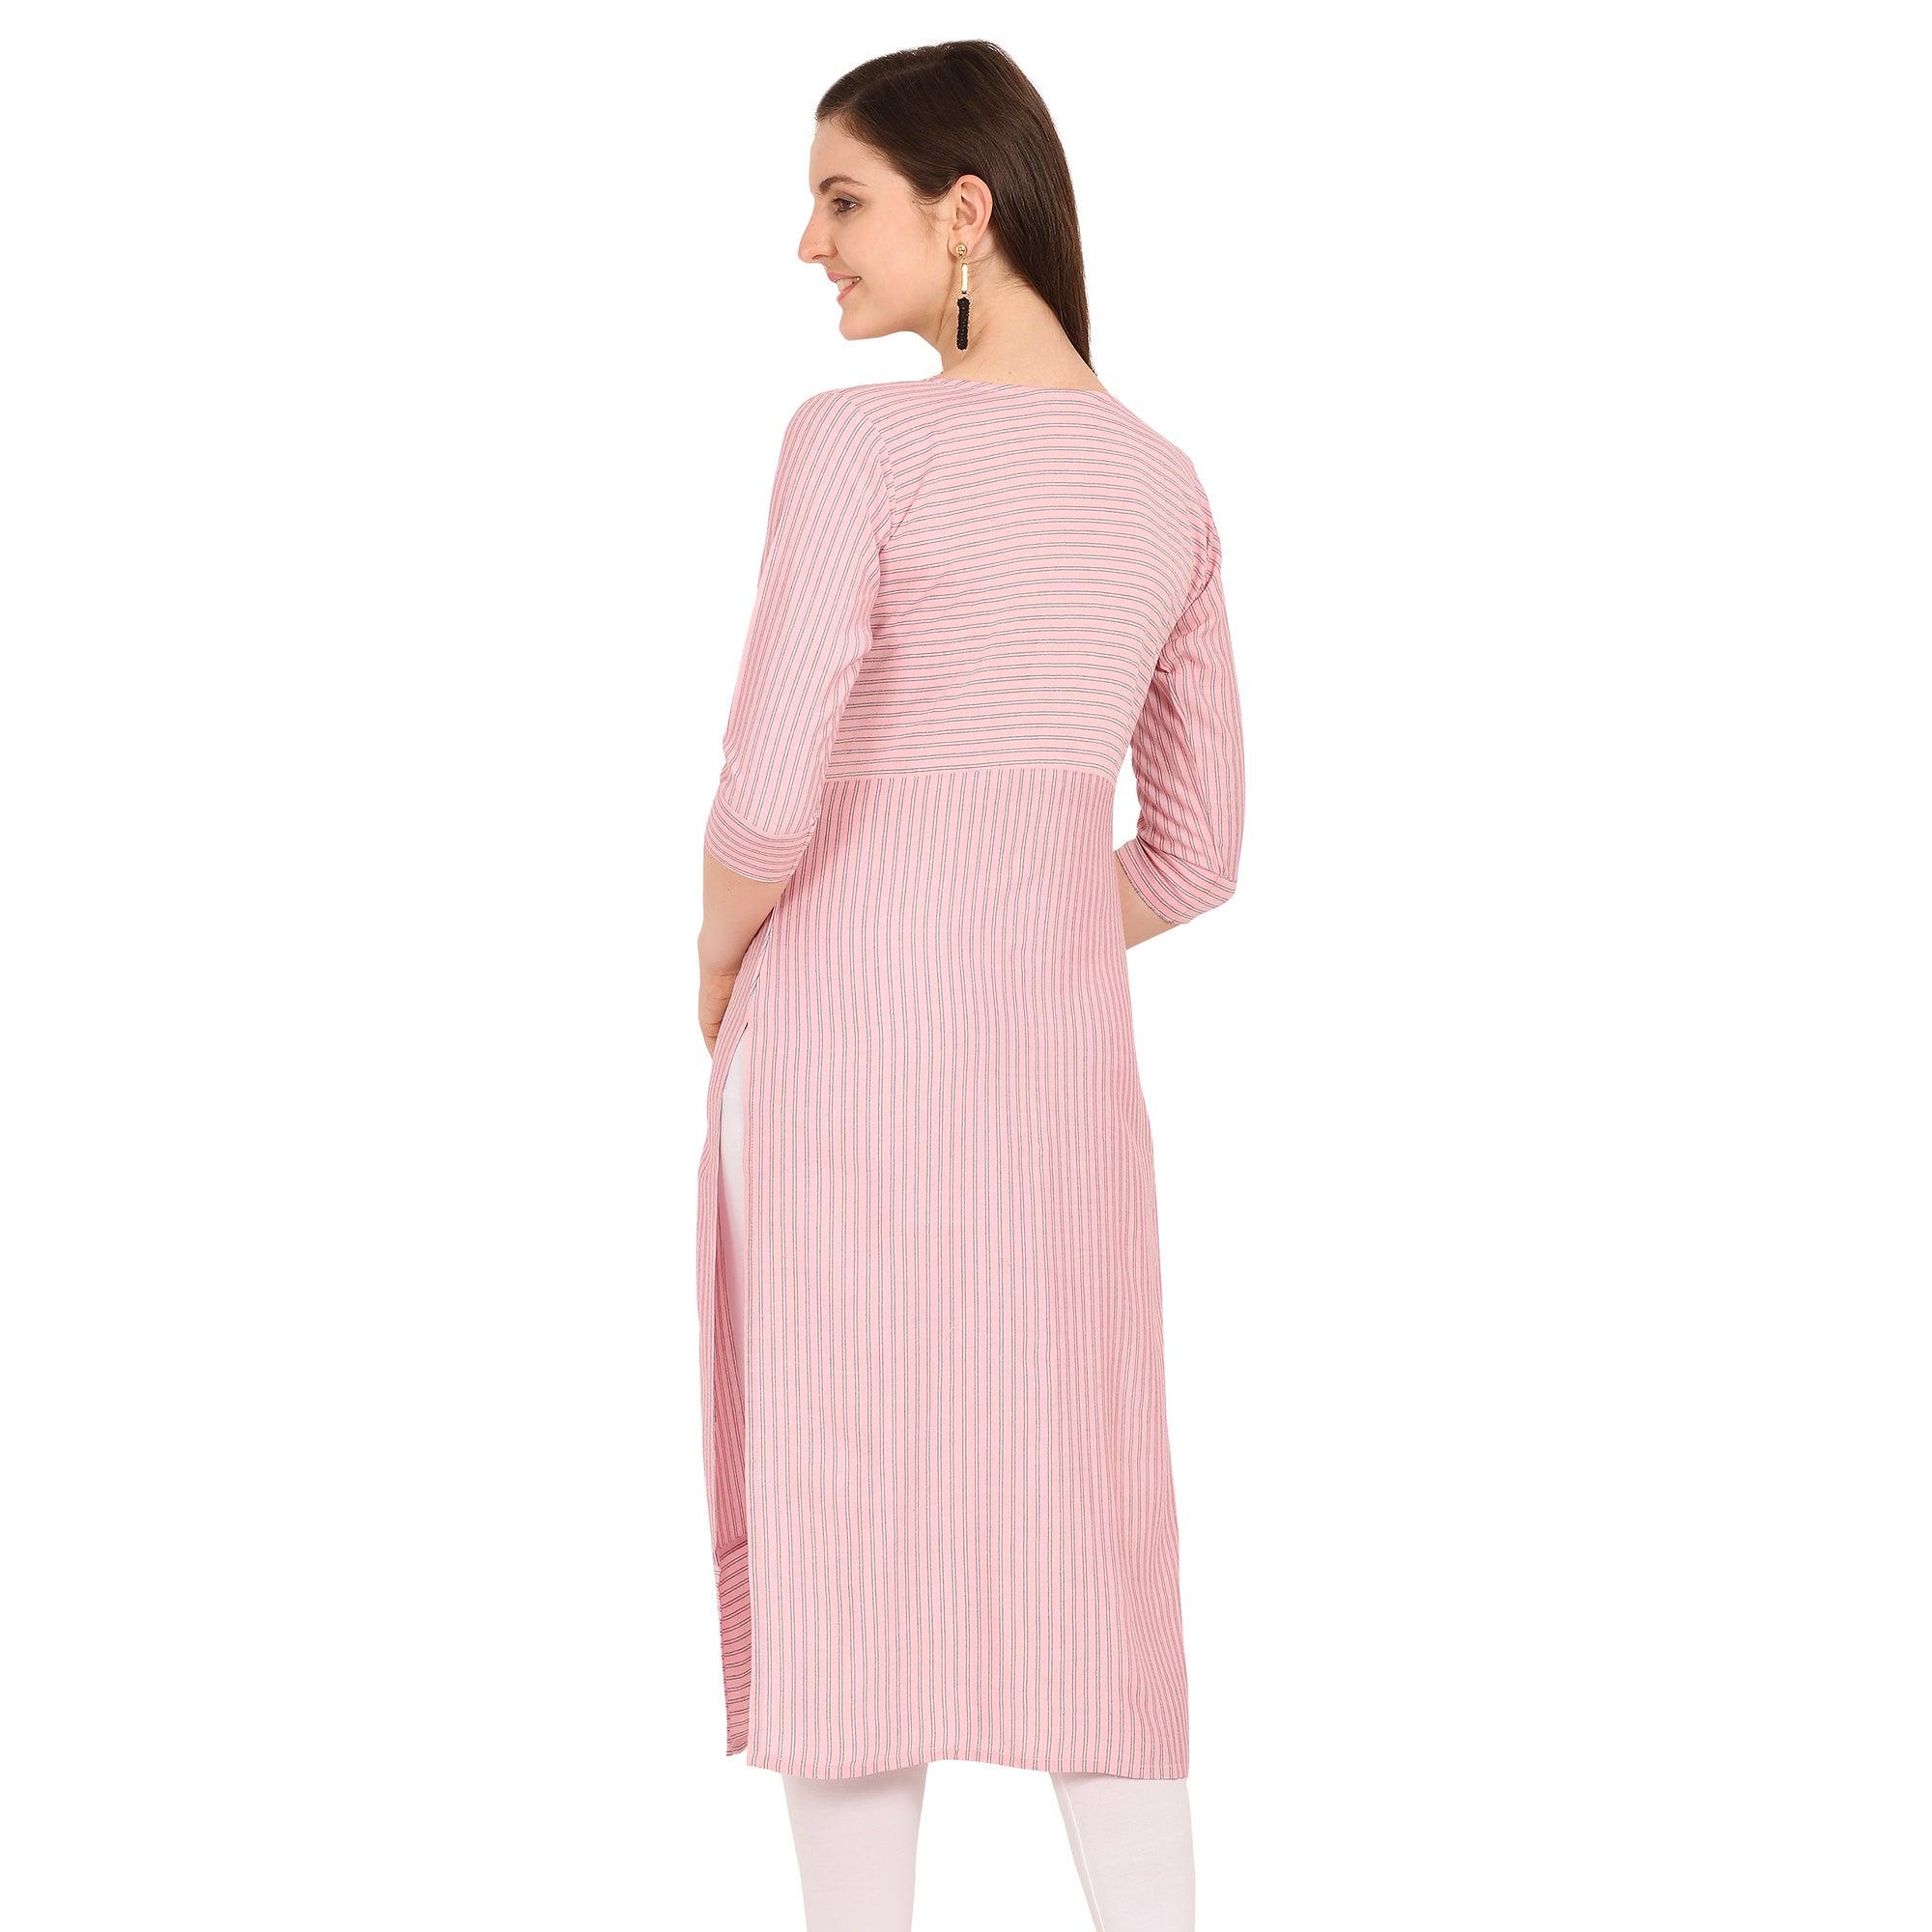 Radiant Pink Colored Party Wear Embellished Work Rayon Kurti - Peachmode